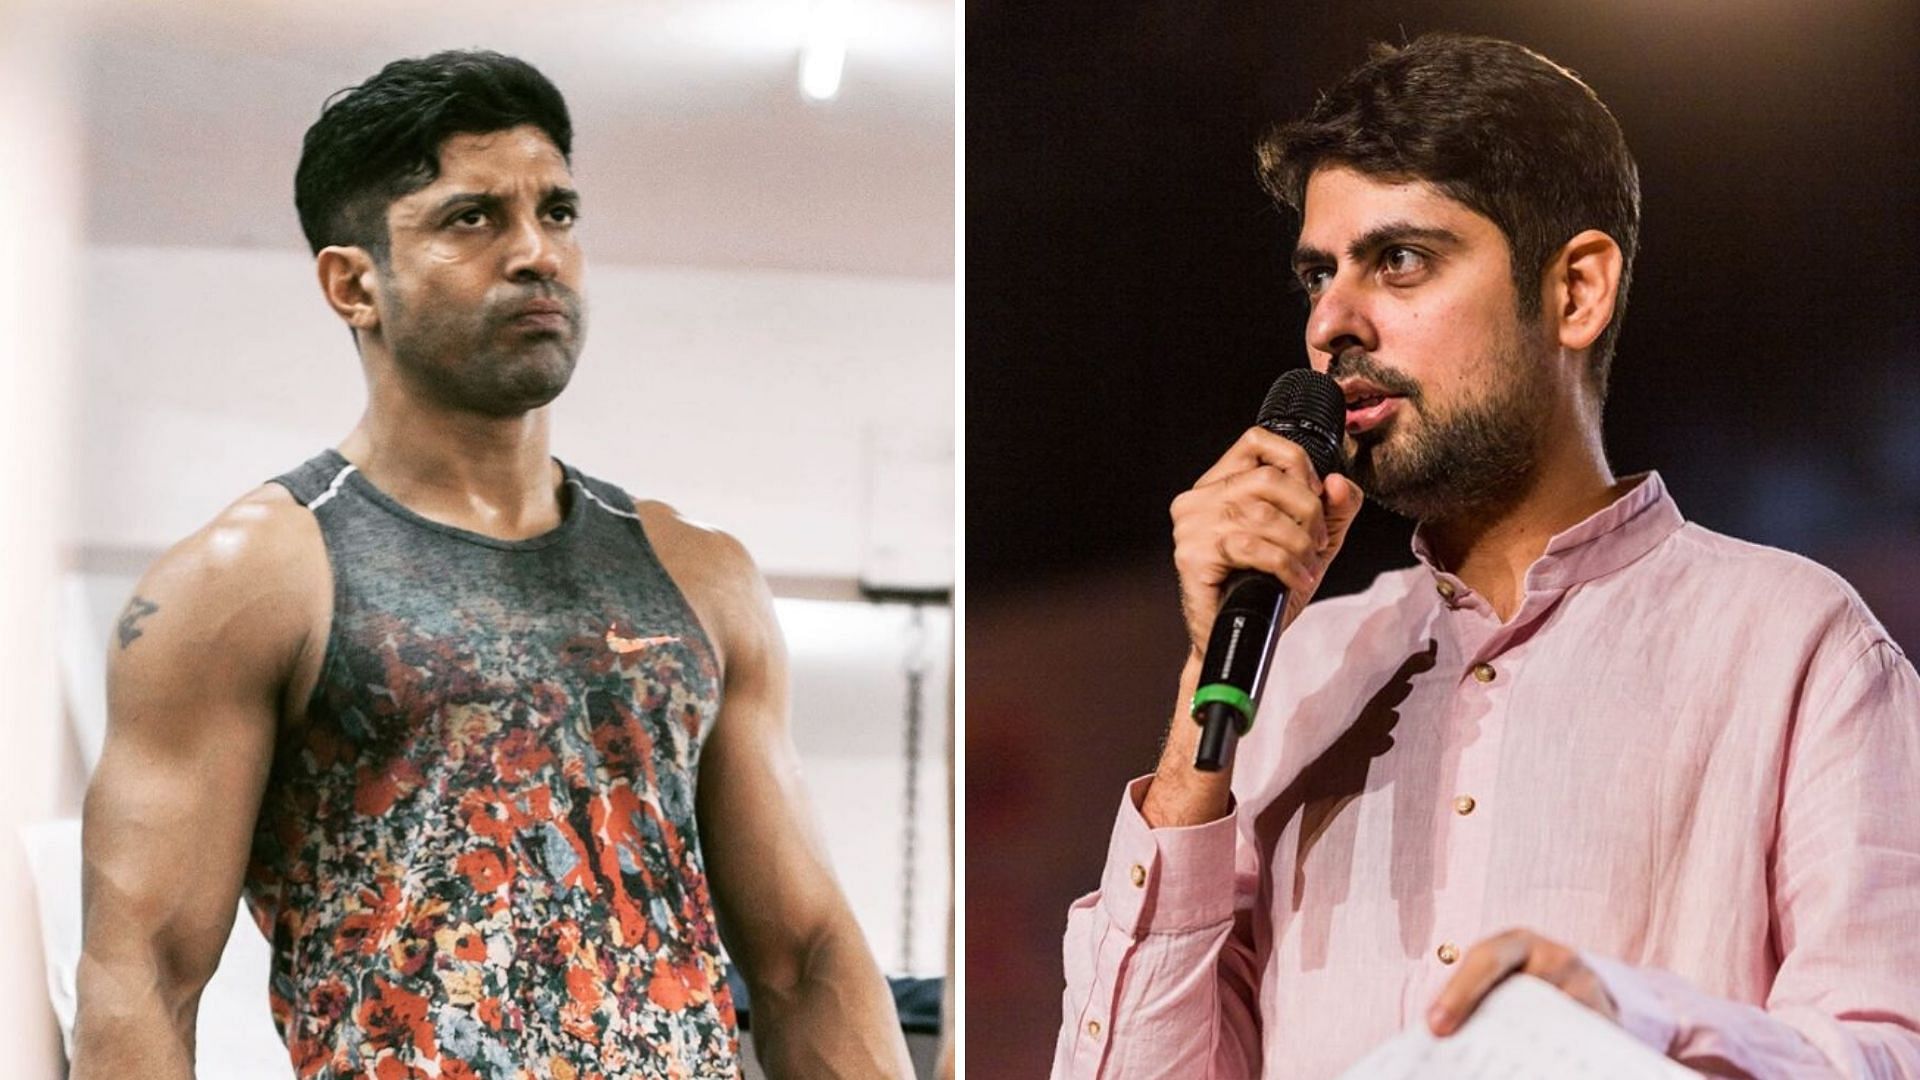 Farhan Akhtar, Richa Chadha and Varun Grover have expressed disappointment over the situation.